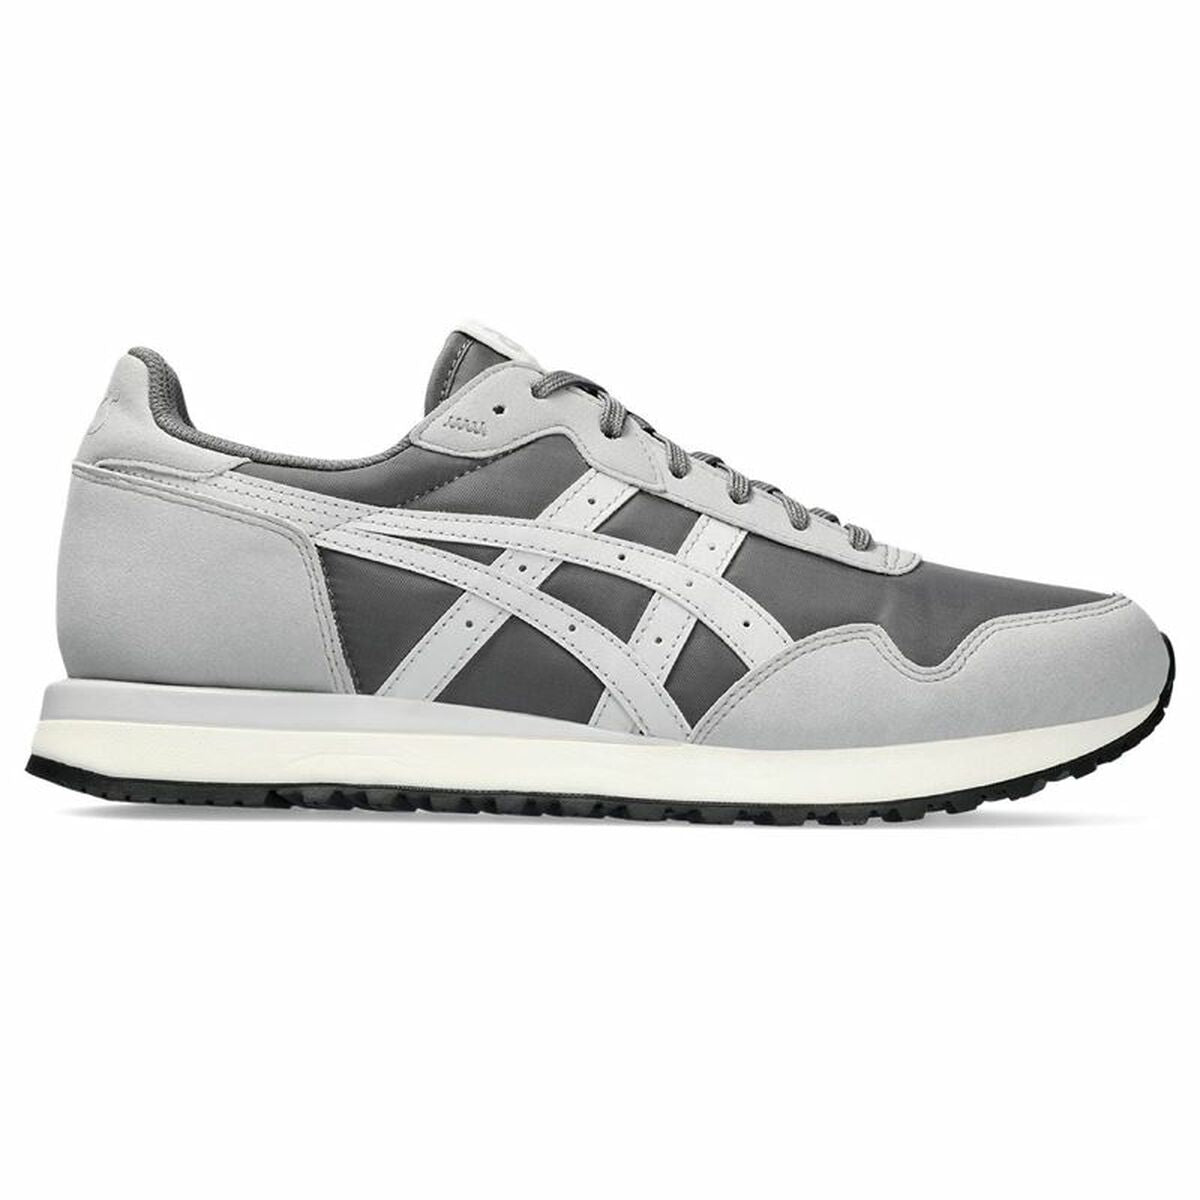 Chaussures casual homme Asics Tiger Runner II Gris